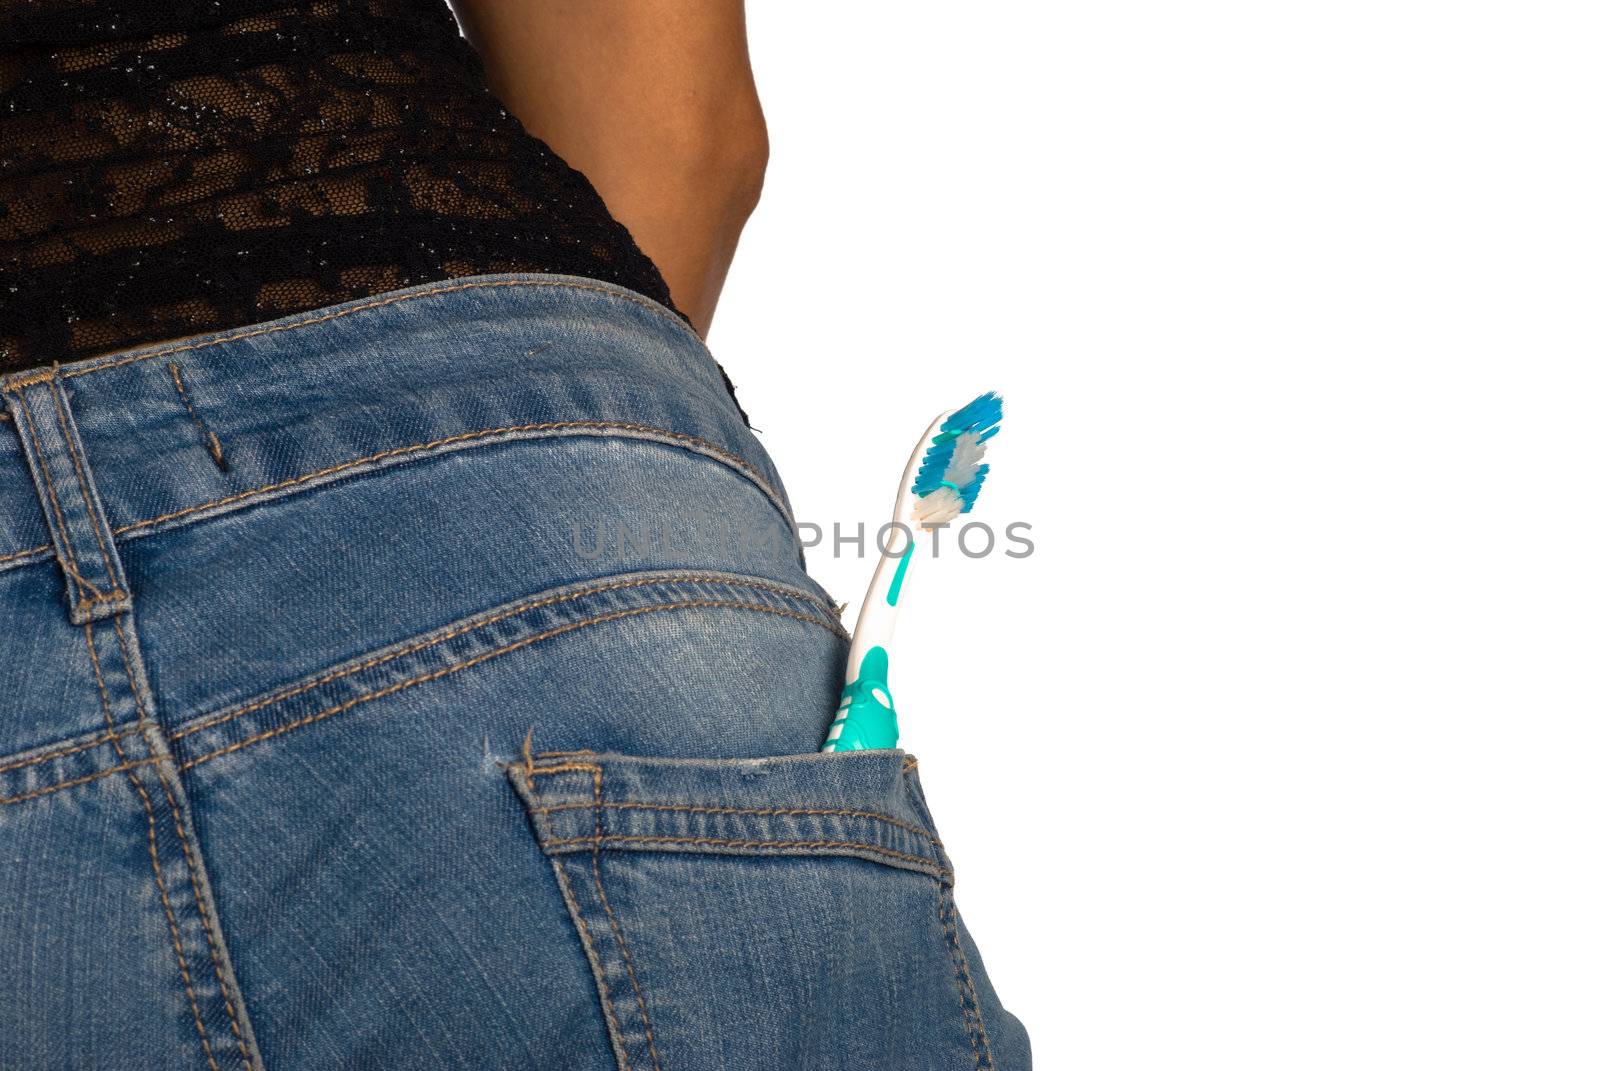 A toothbrtush in a jeans pocket